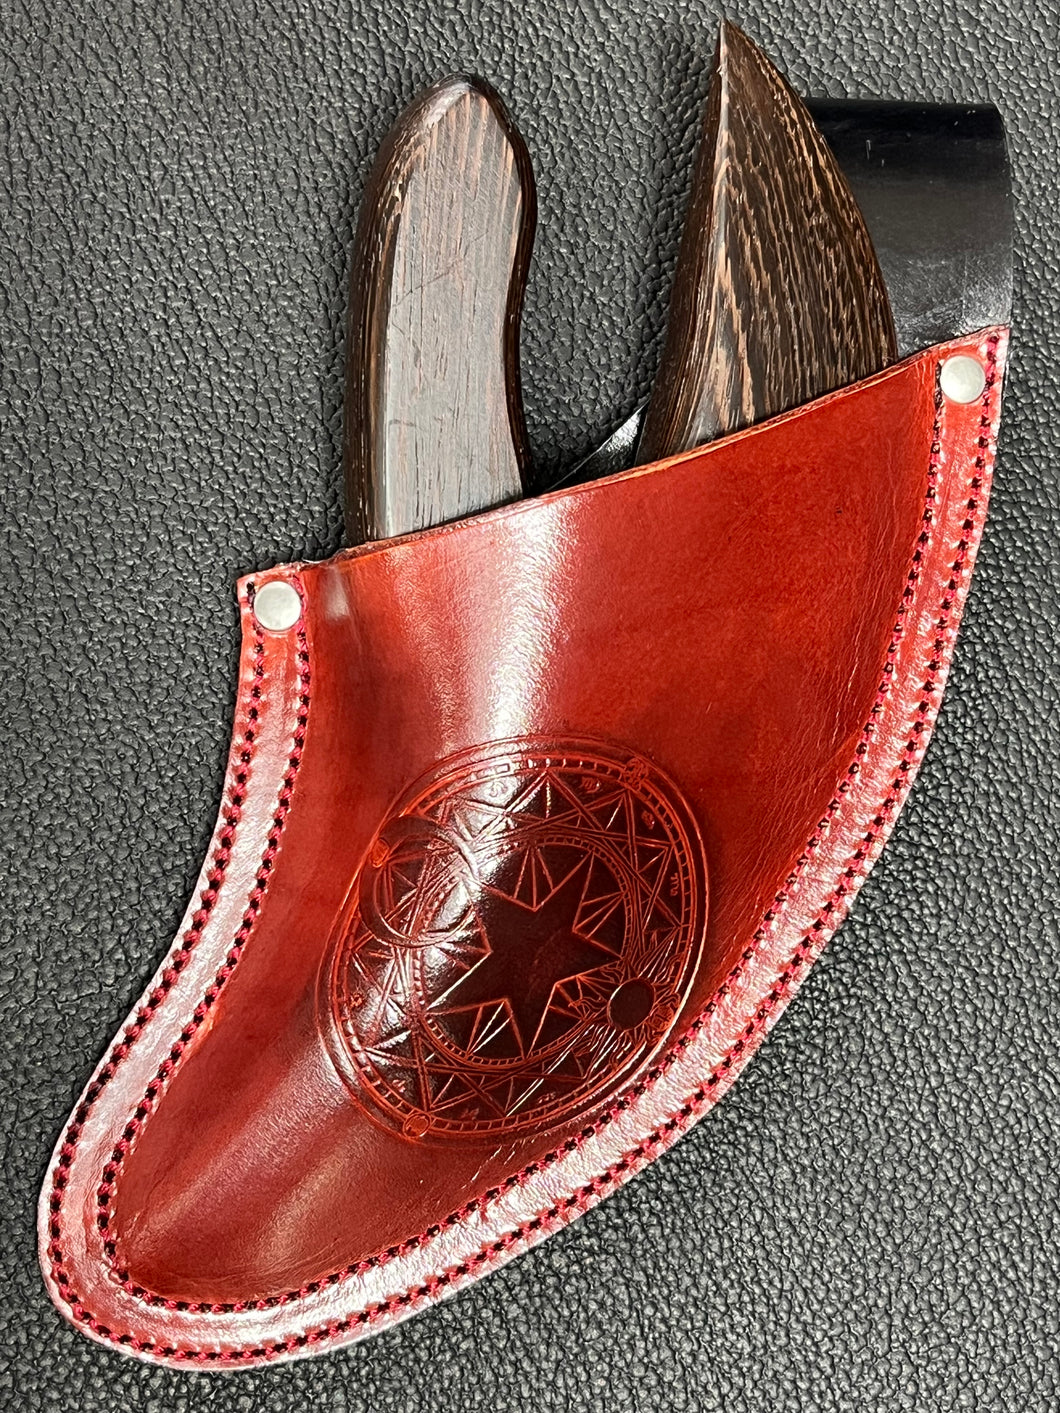 Wax Knife & Sheath, Wenge Blade, Red Leather with Astrological Motif